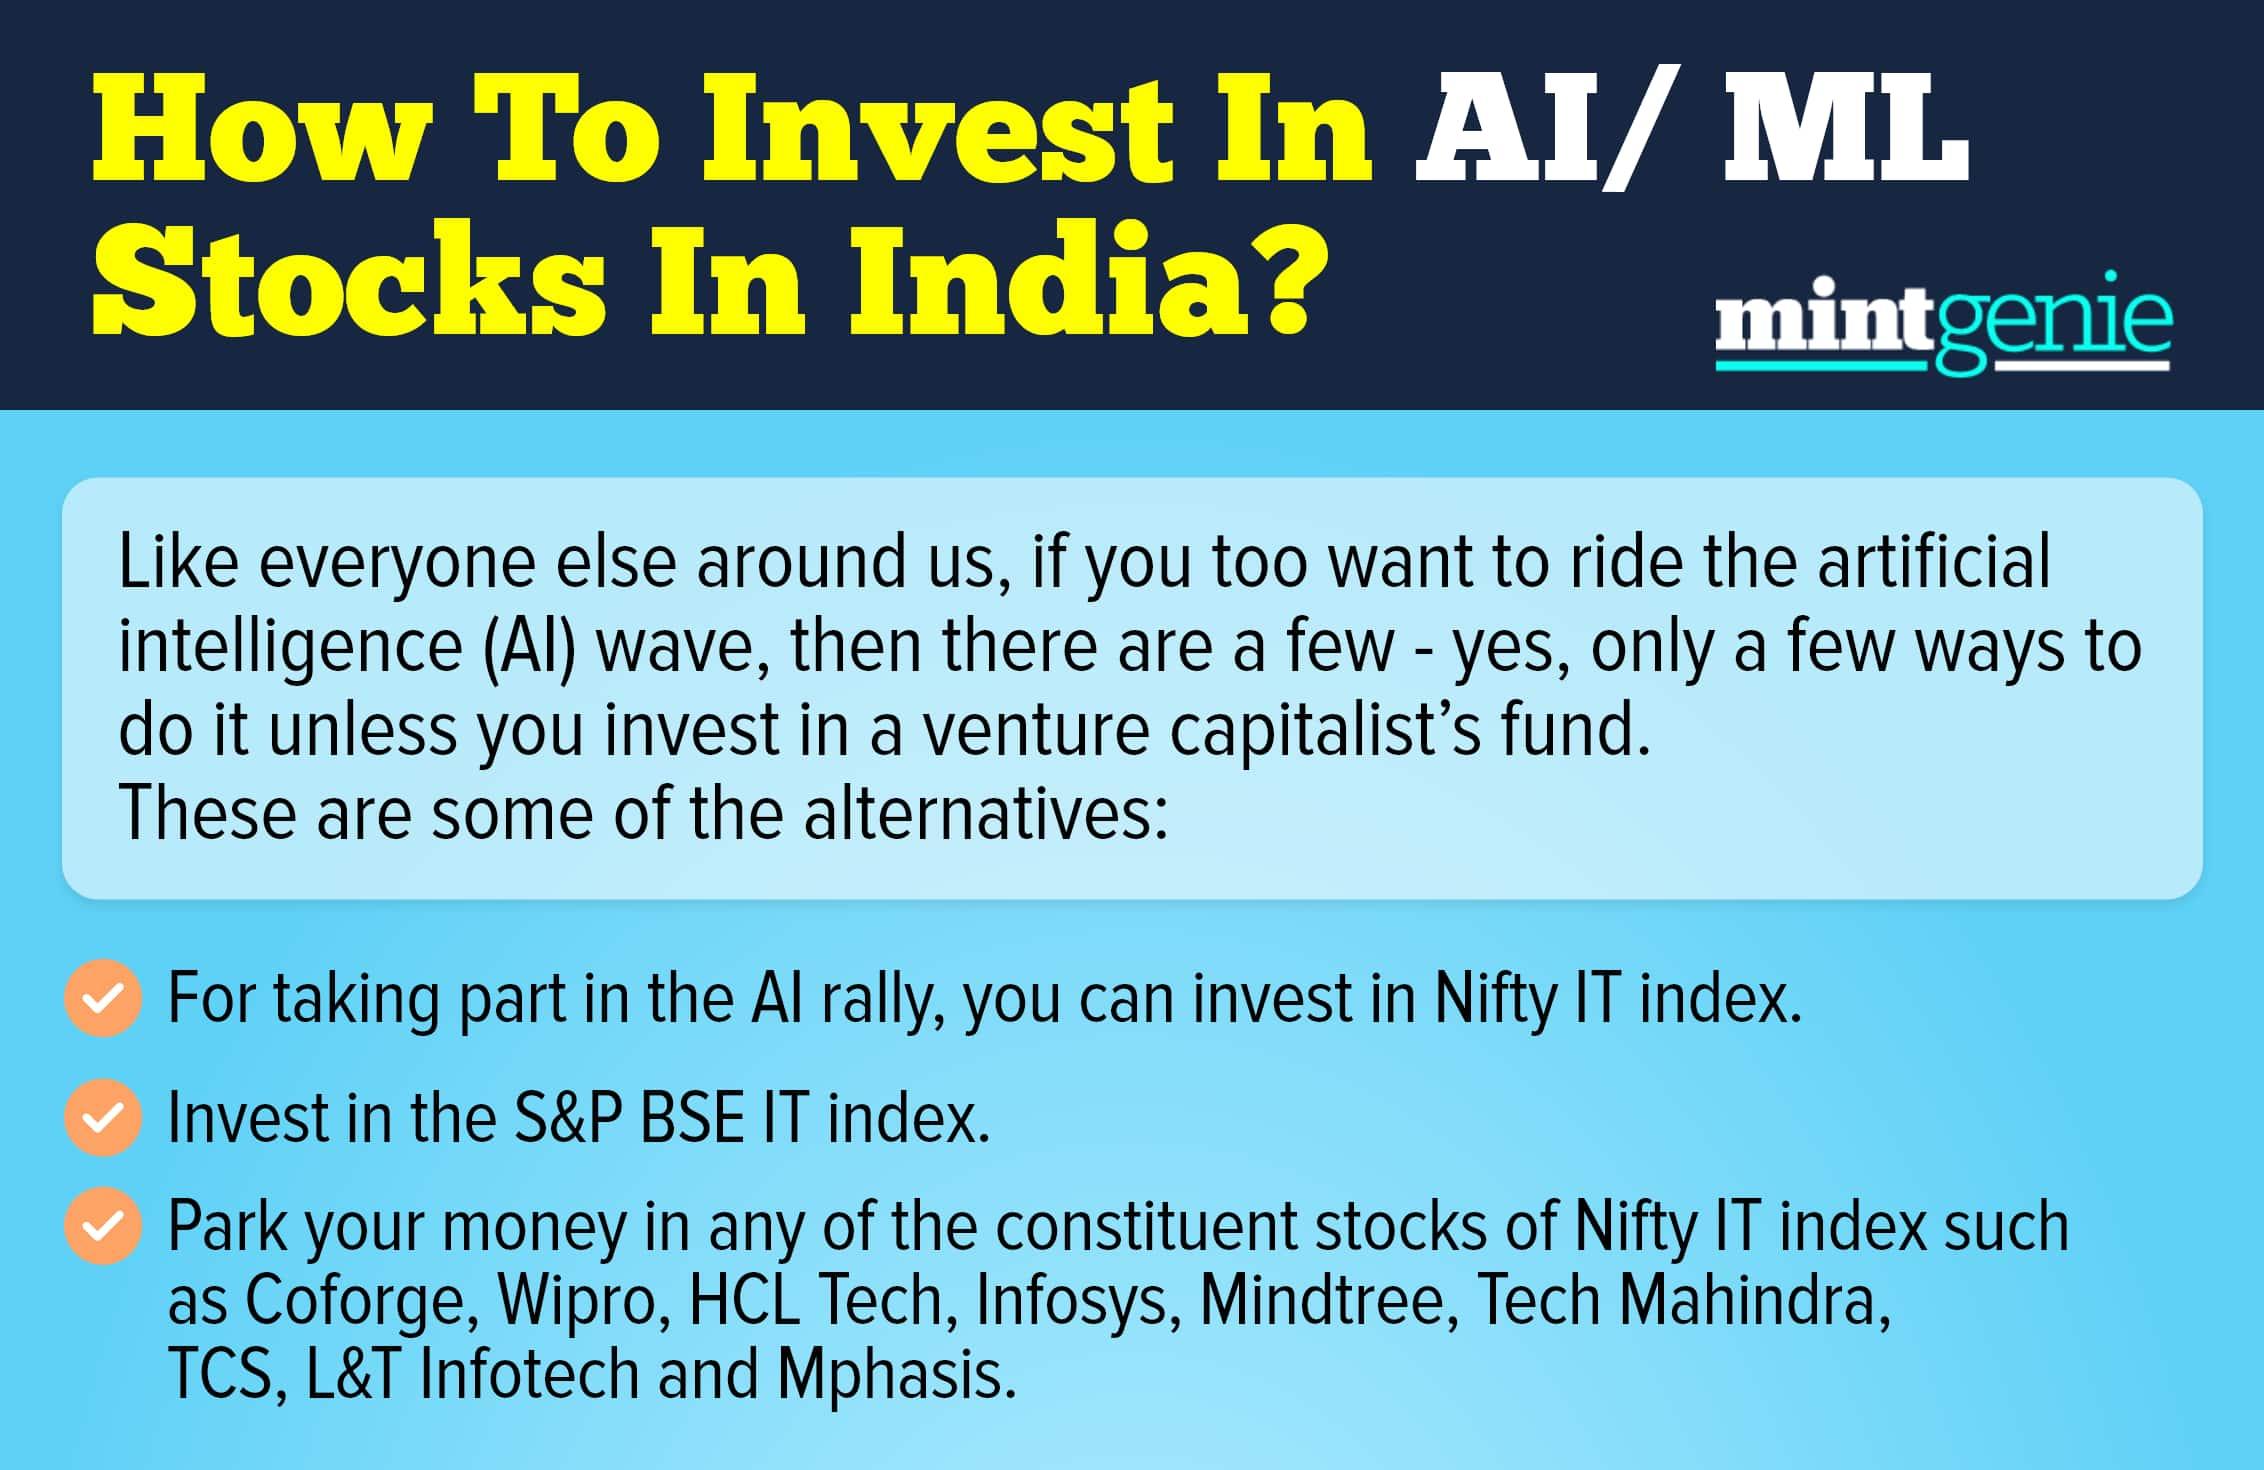 There are some ways to invest in the artificial intelligence/ machine learning rally in India.